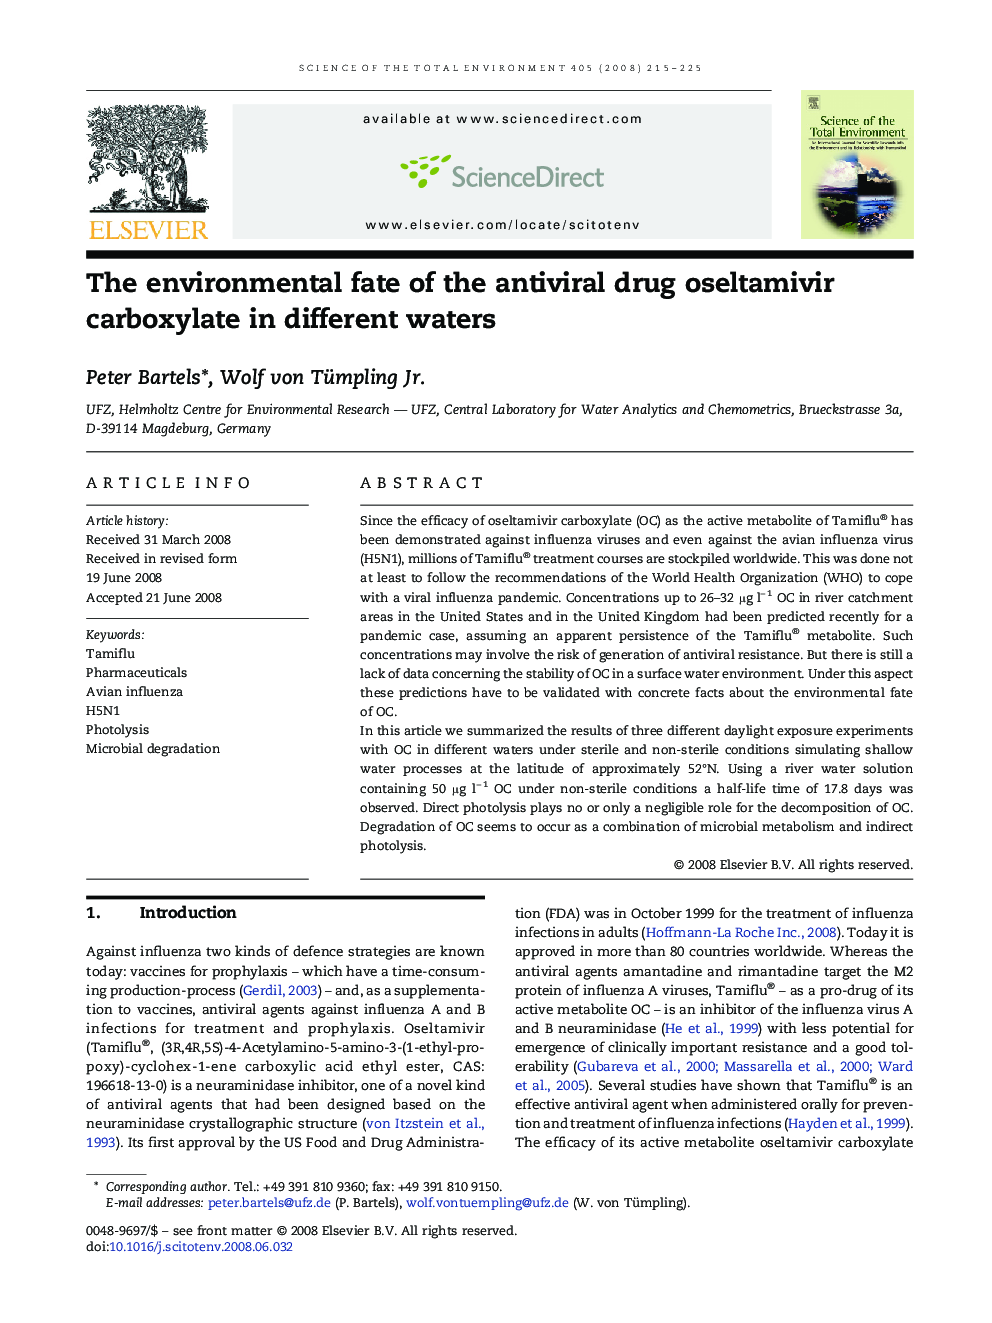 The environmental fate of the antiviral drug oseltamivir carboxylate in different waters